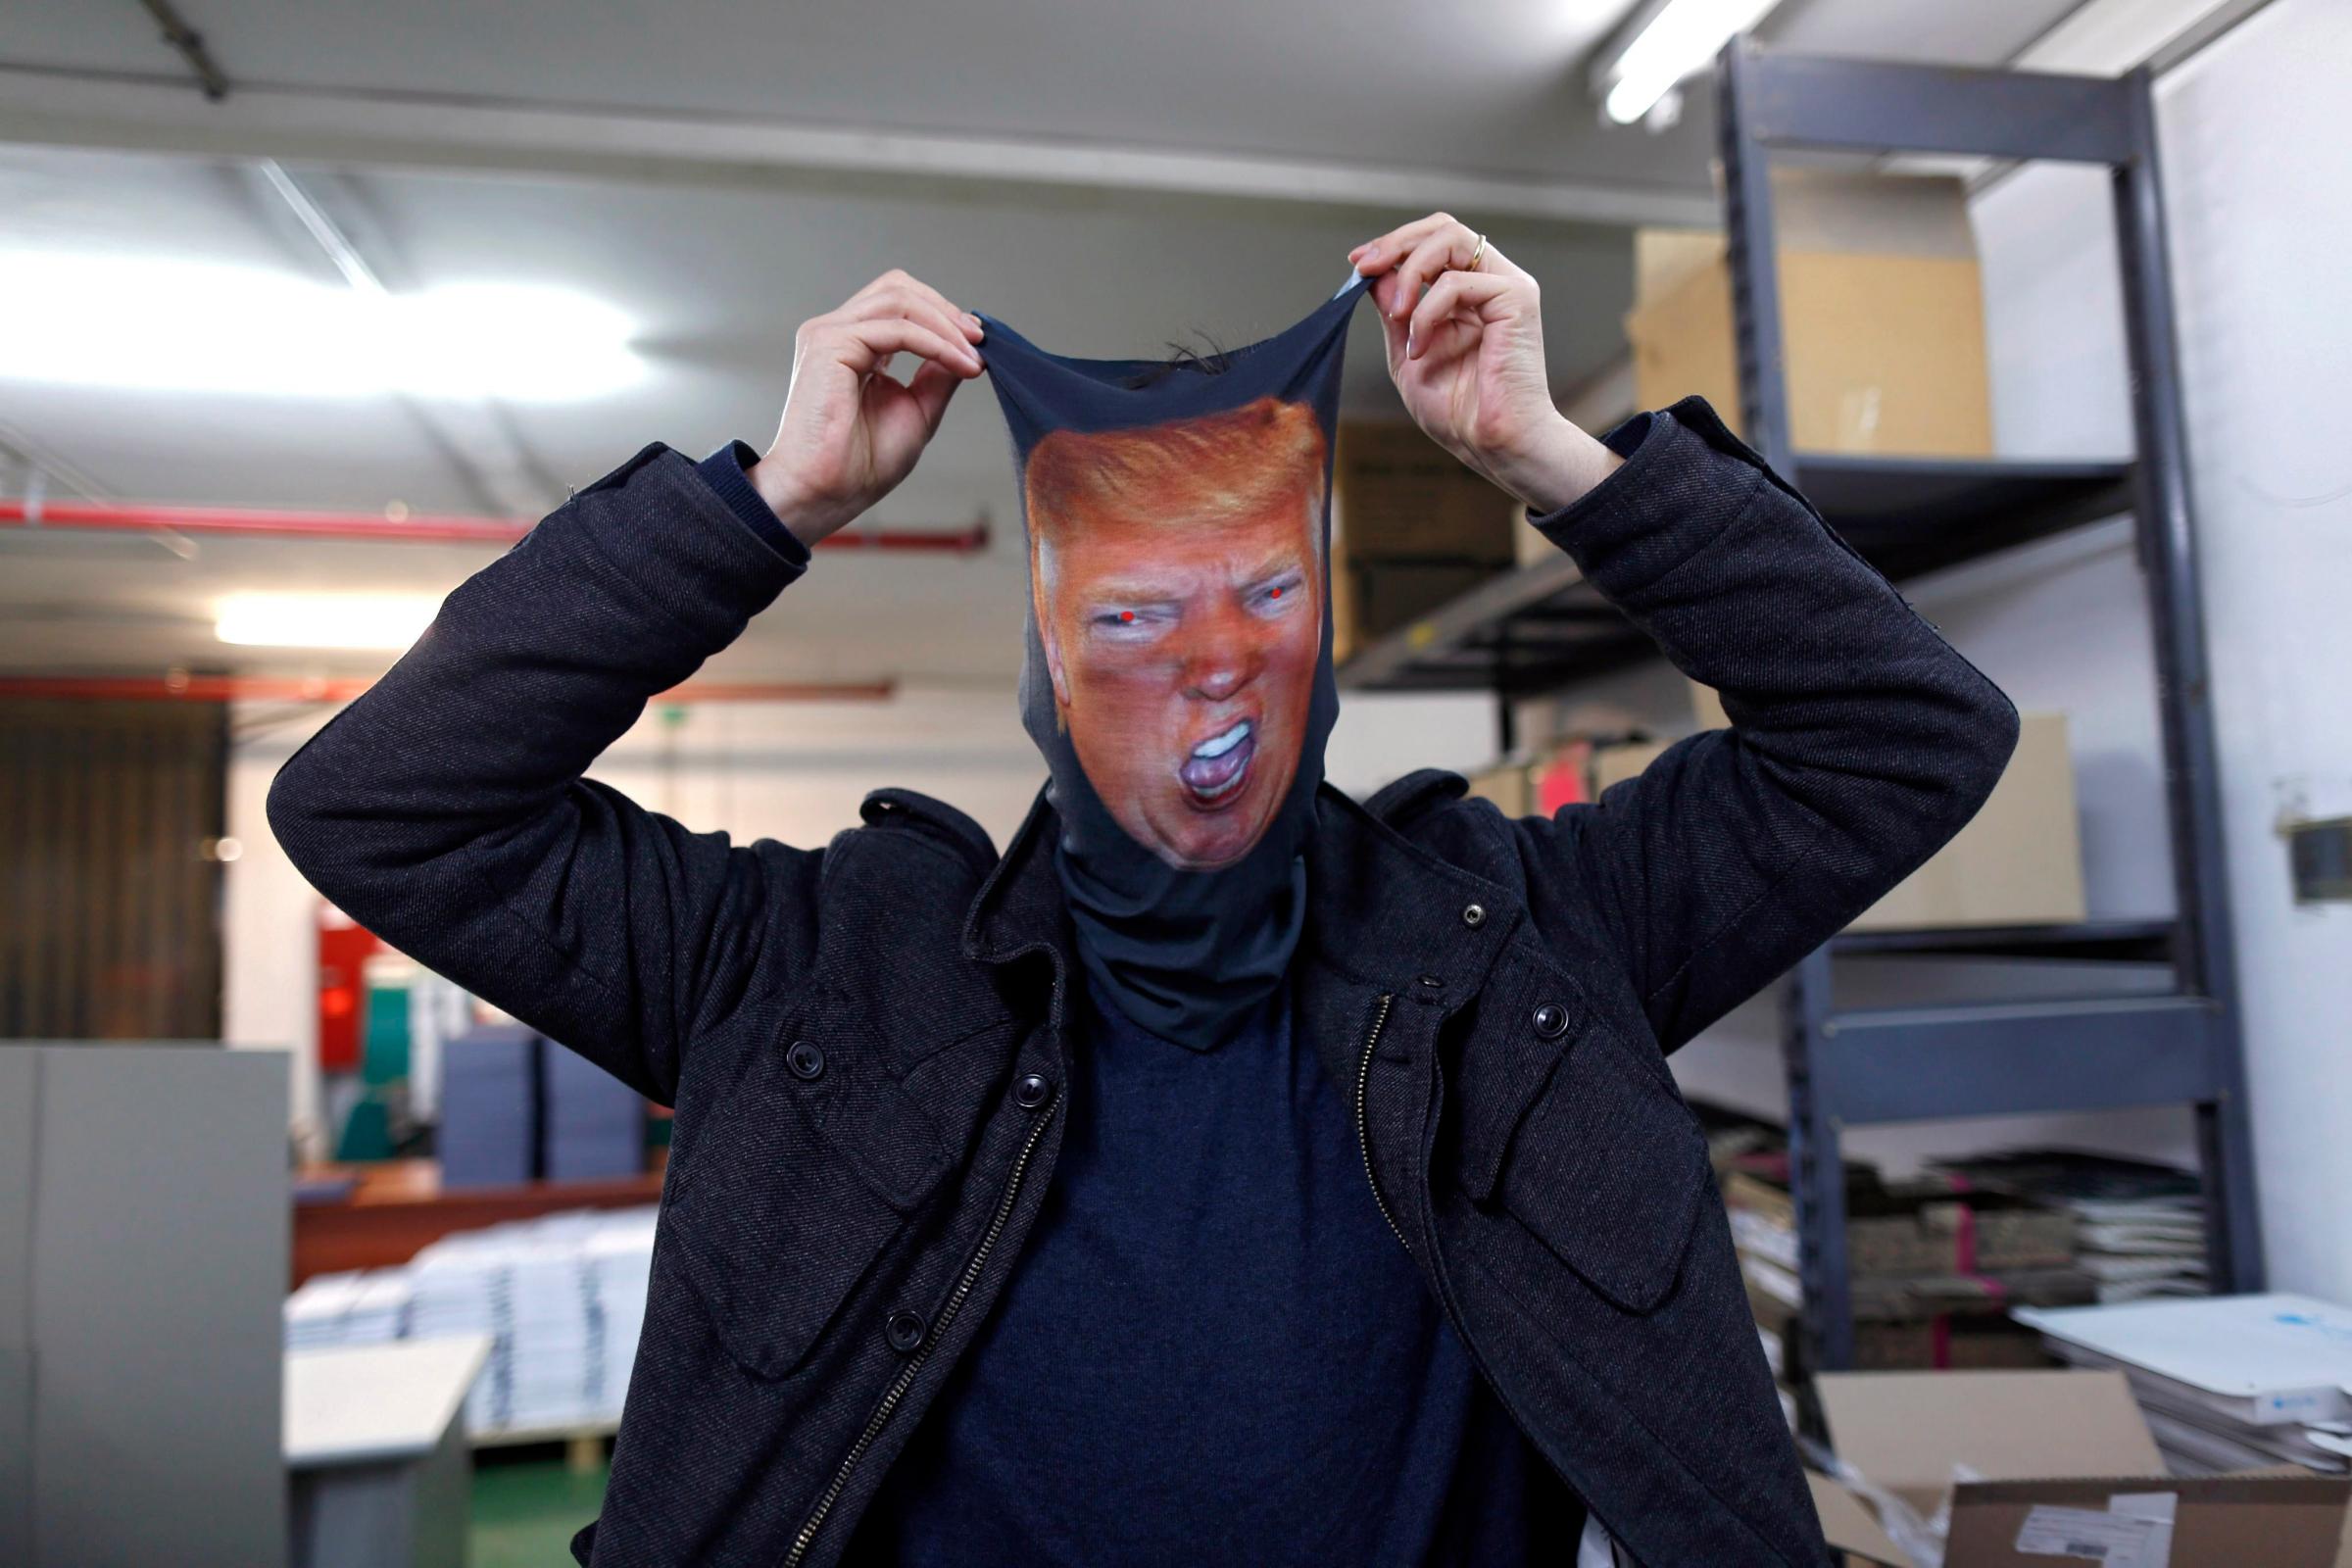 Dror Mangel poses with a printed mask showing the likeness of Donald Trump in his shop in Tel Aviv, Israel on March 17, 2016.